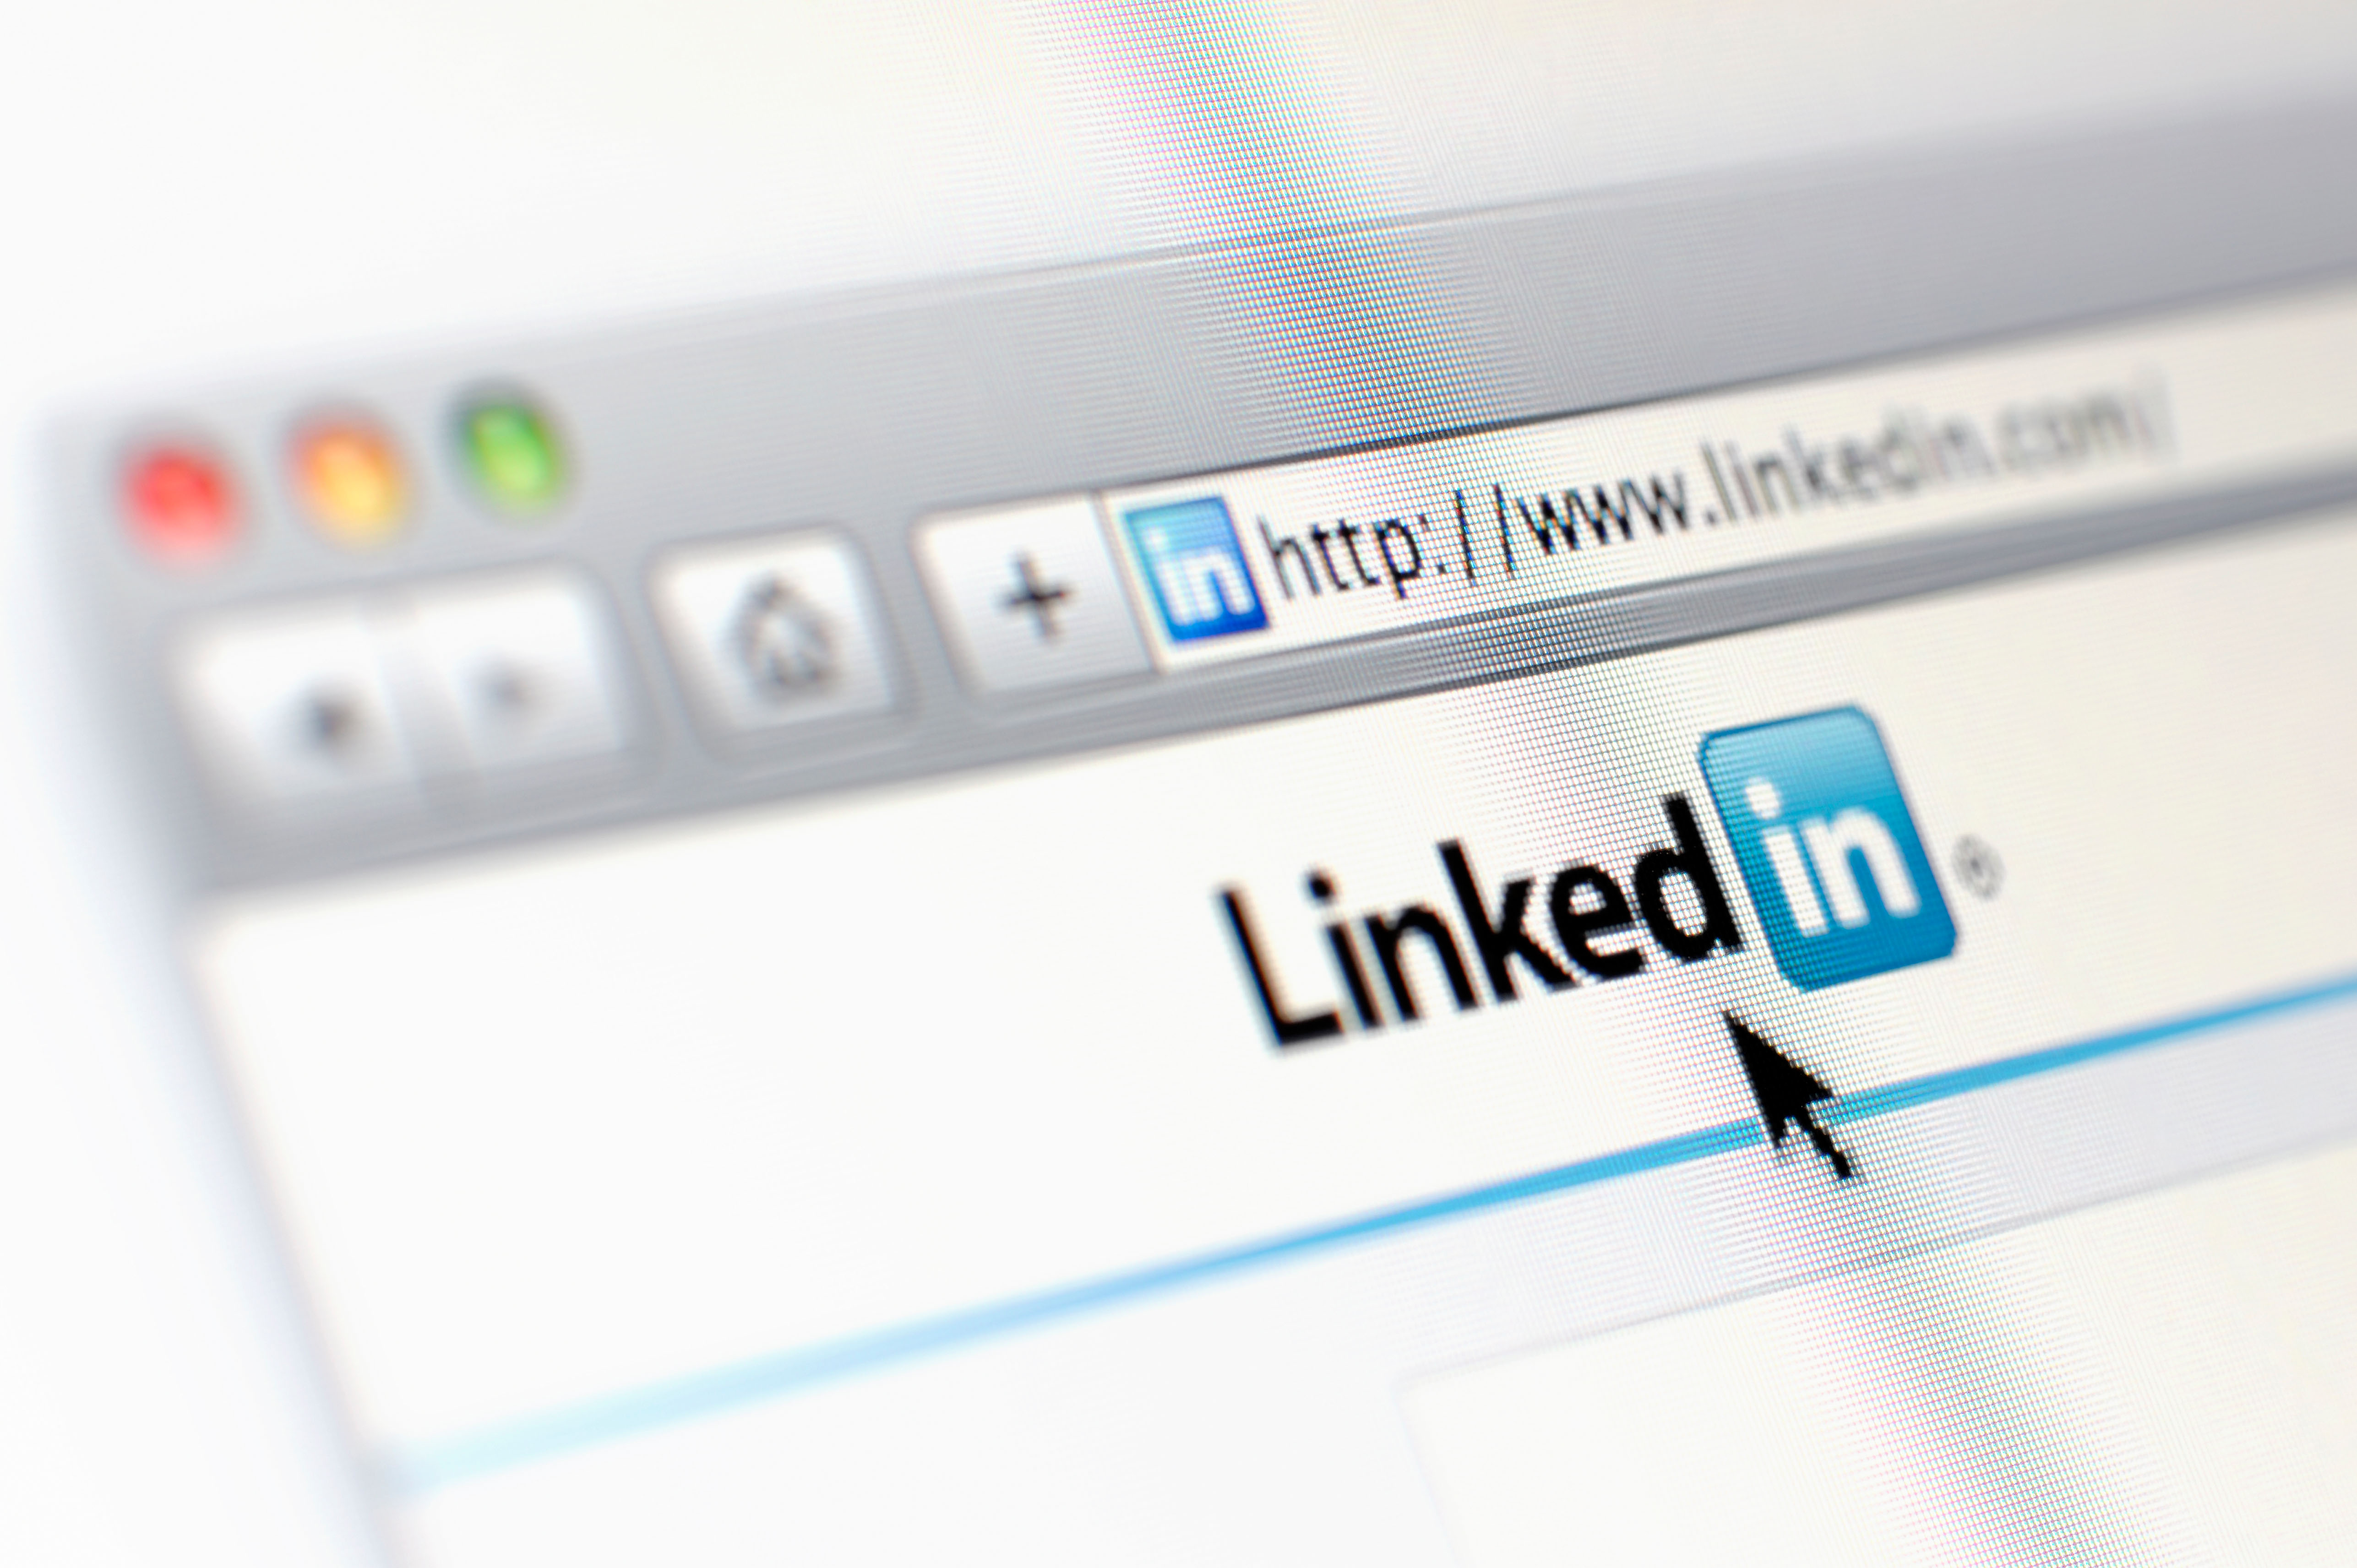 From Dark Reading – Convincing LinkedIn ‘Profiles’ Target Saudi Workers for Information Leakage